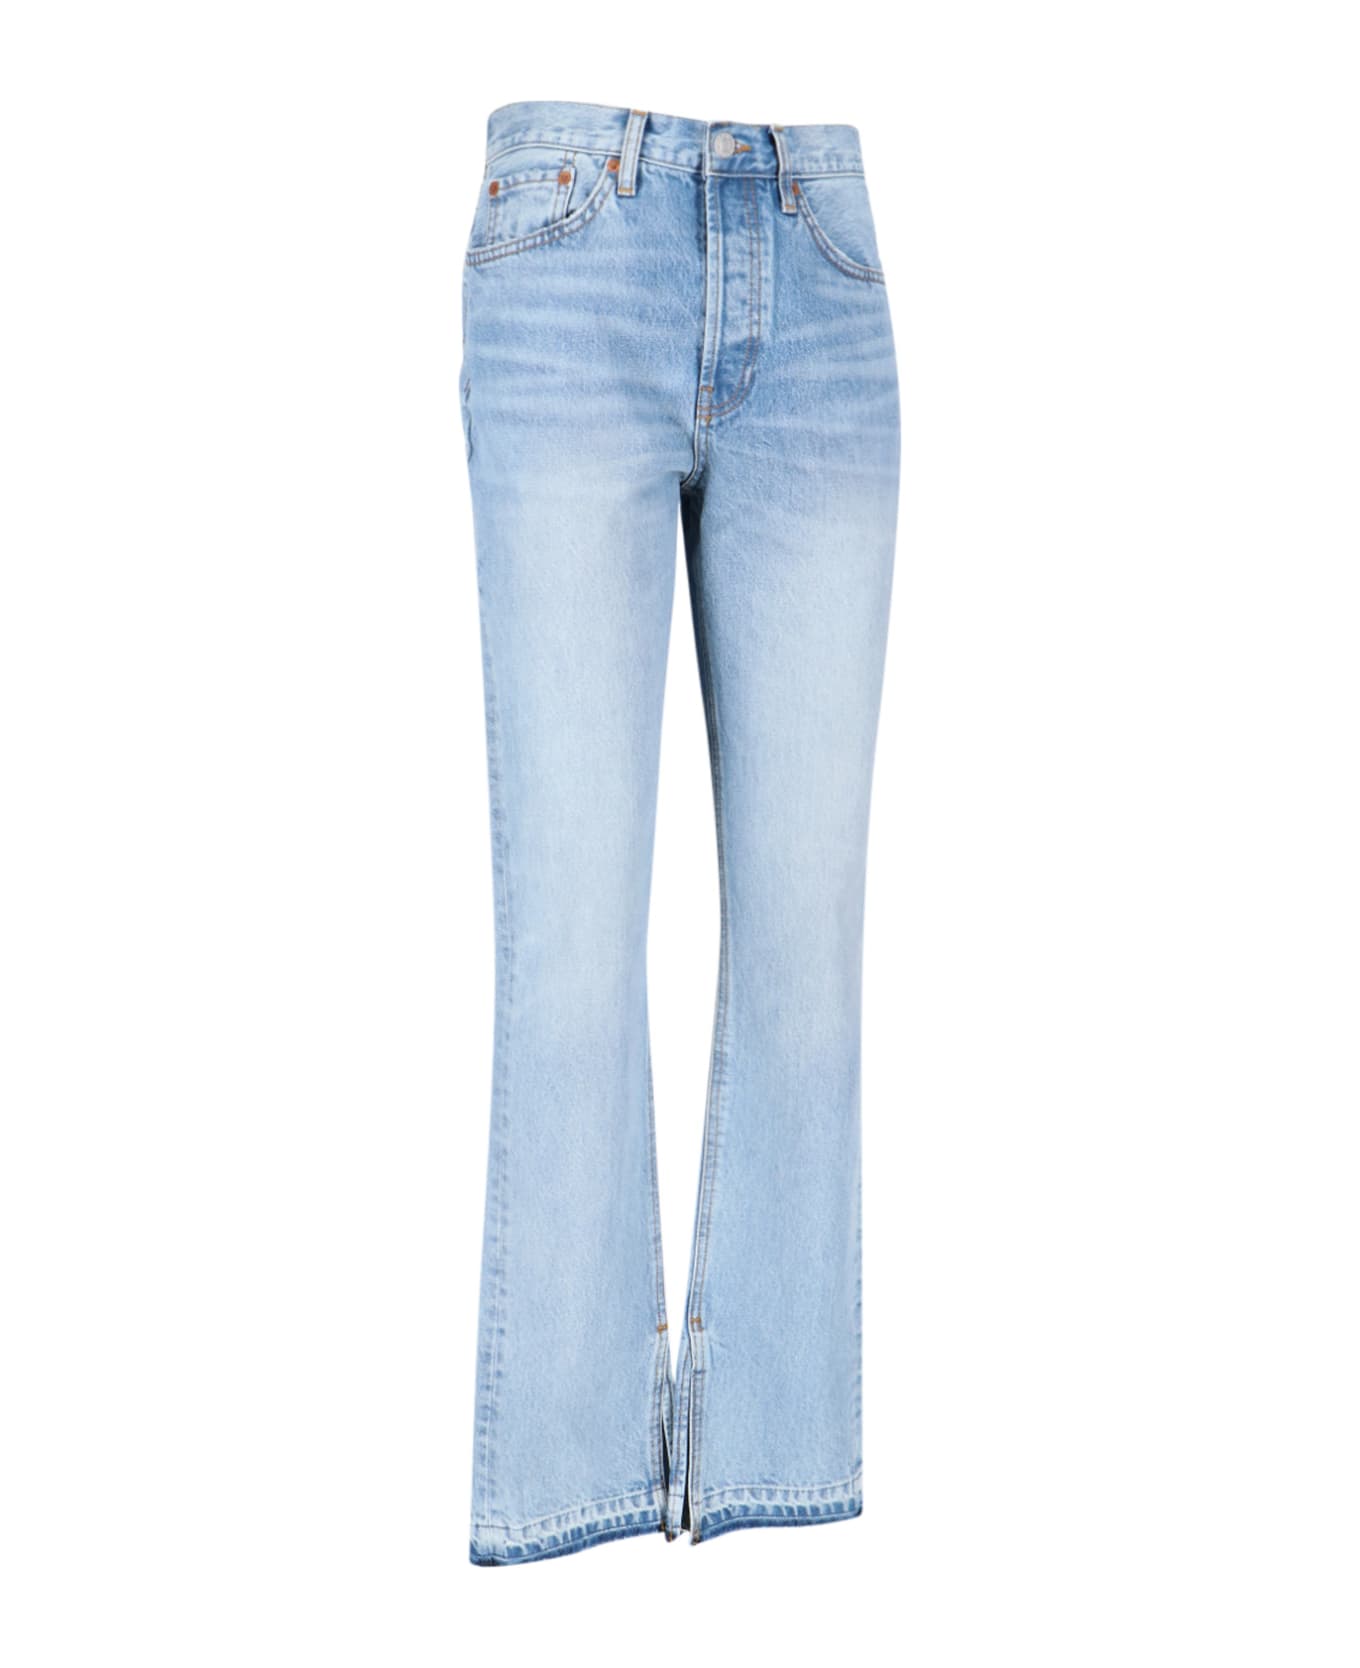 RE/DONE Jeans - Light blue